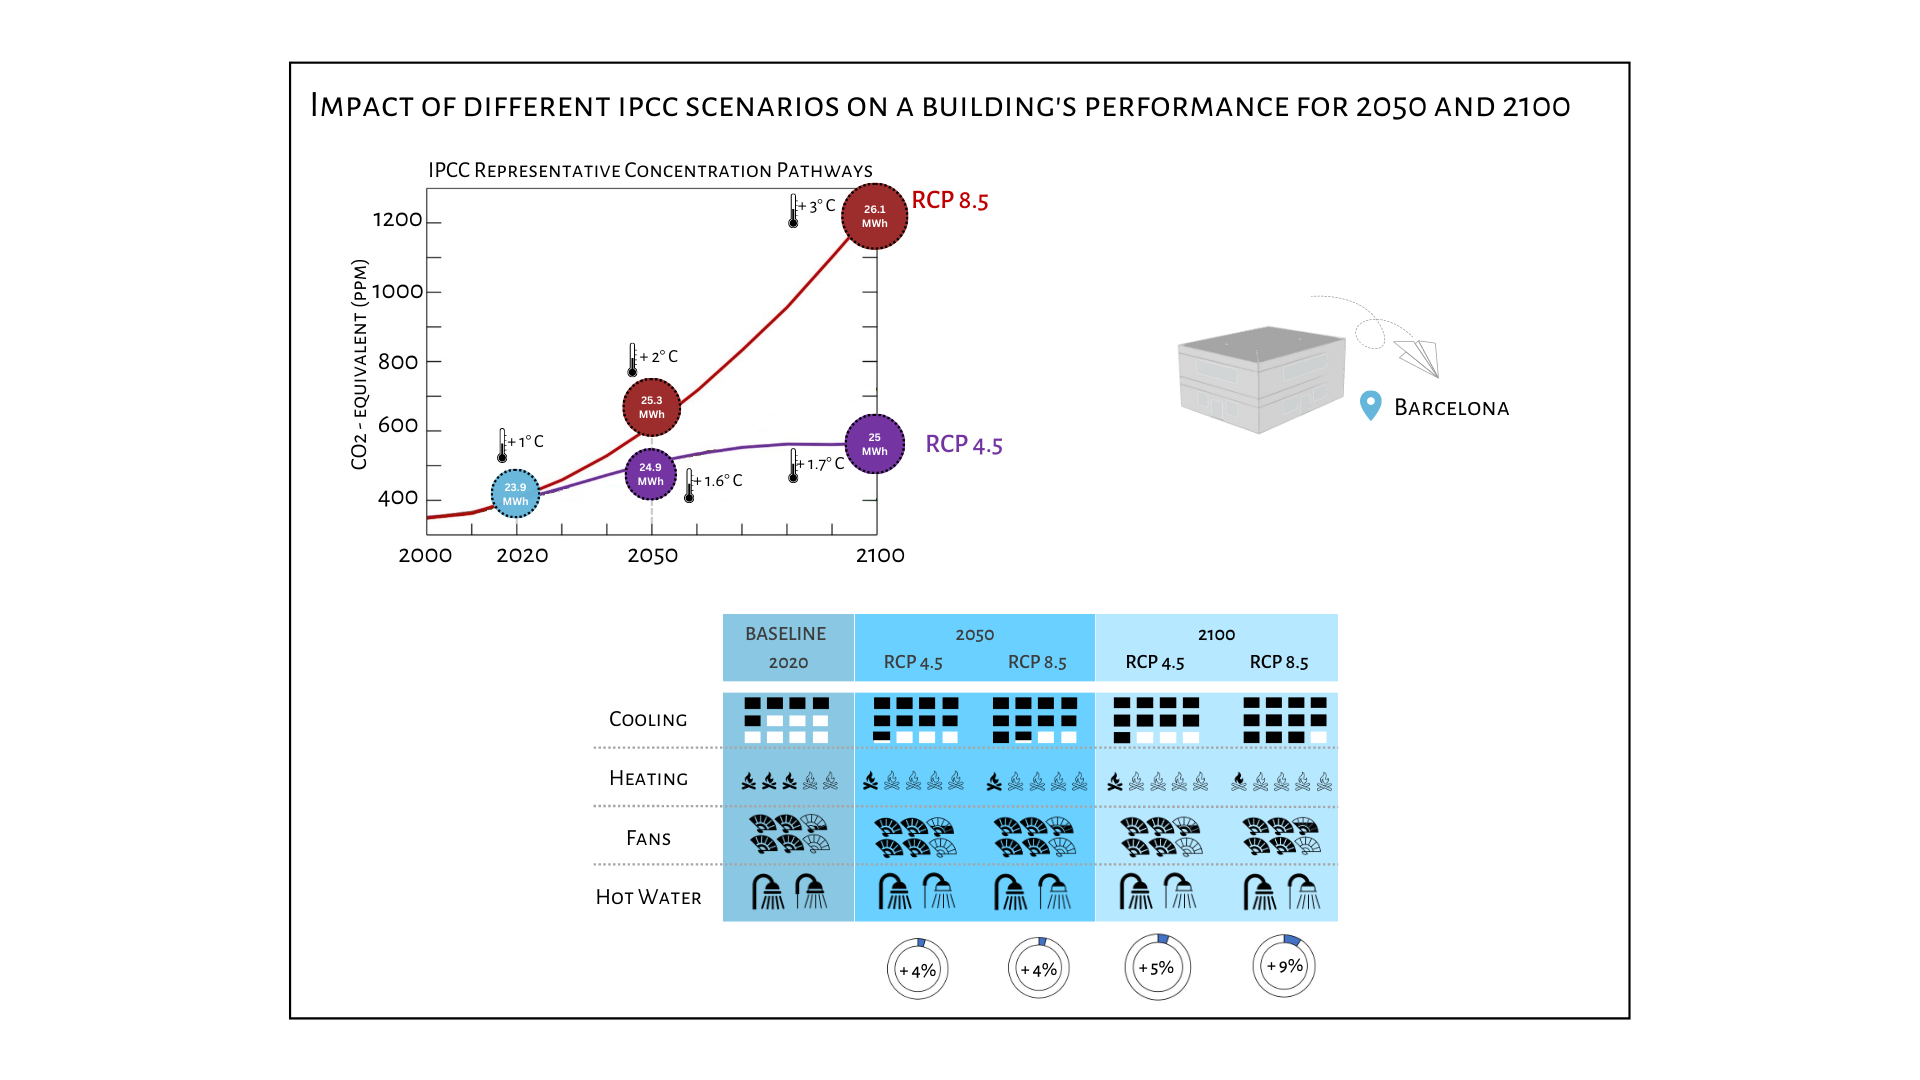 What is the impact of different IPCC scenarios on a building’s performance for 2050 and 2100?